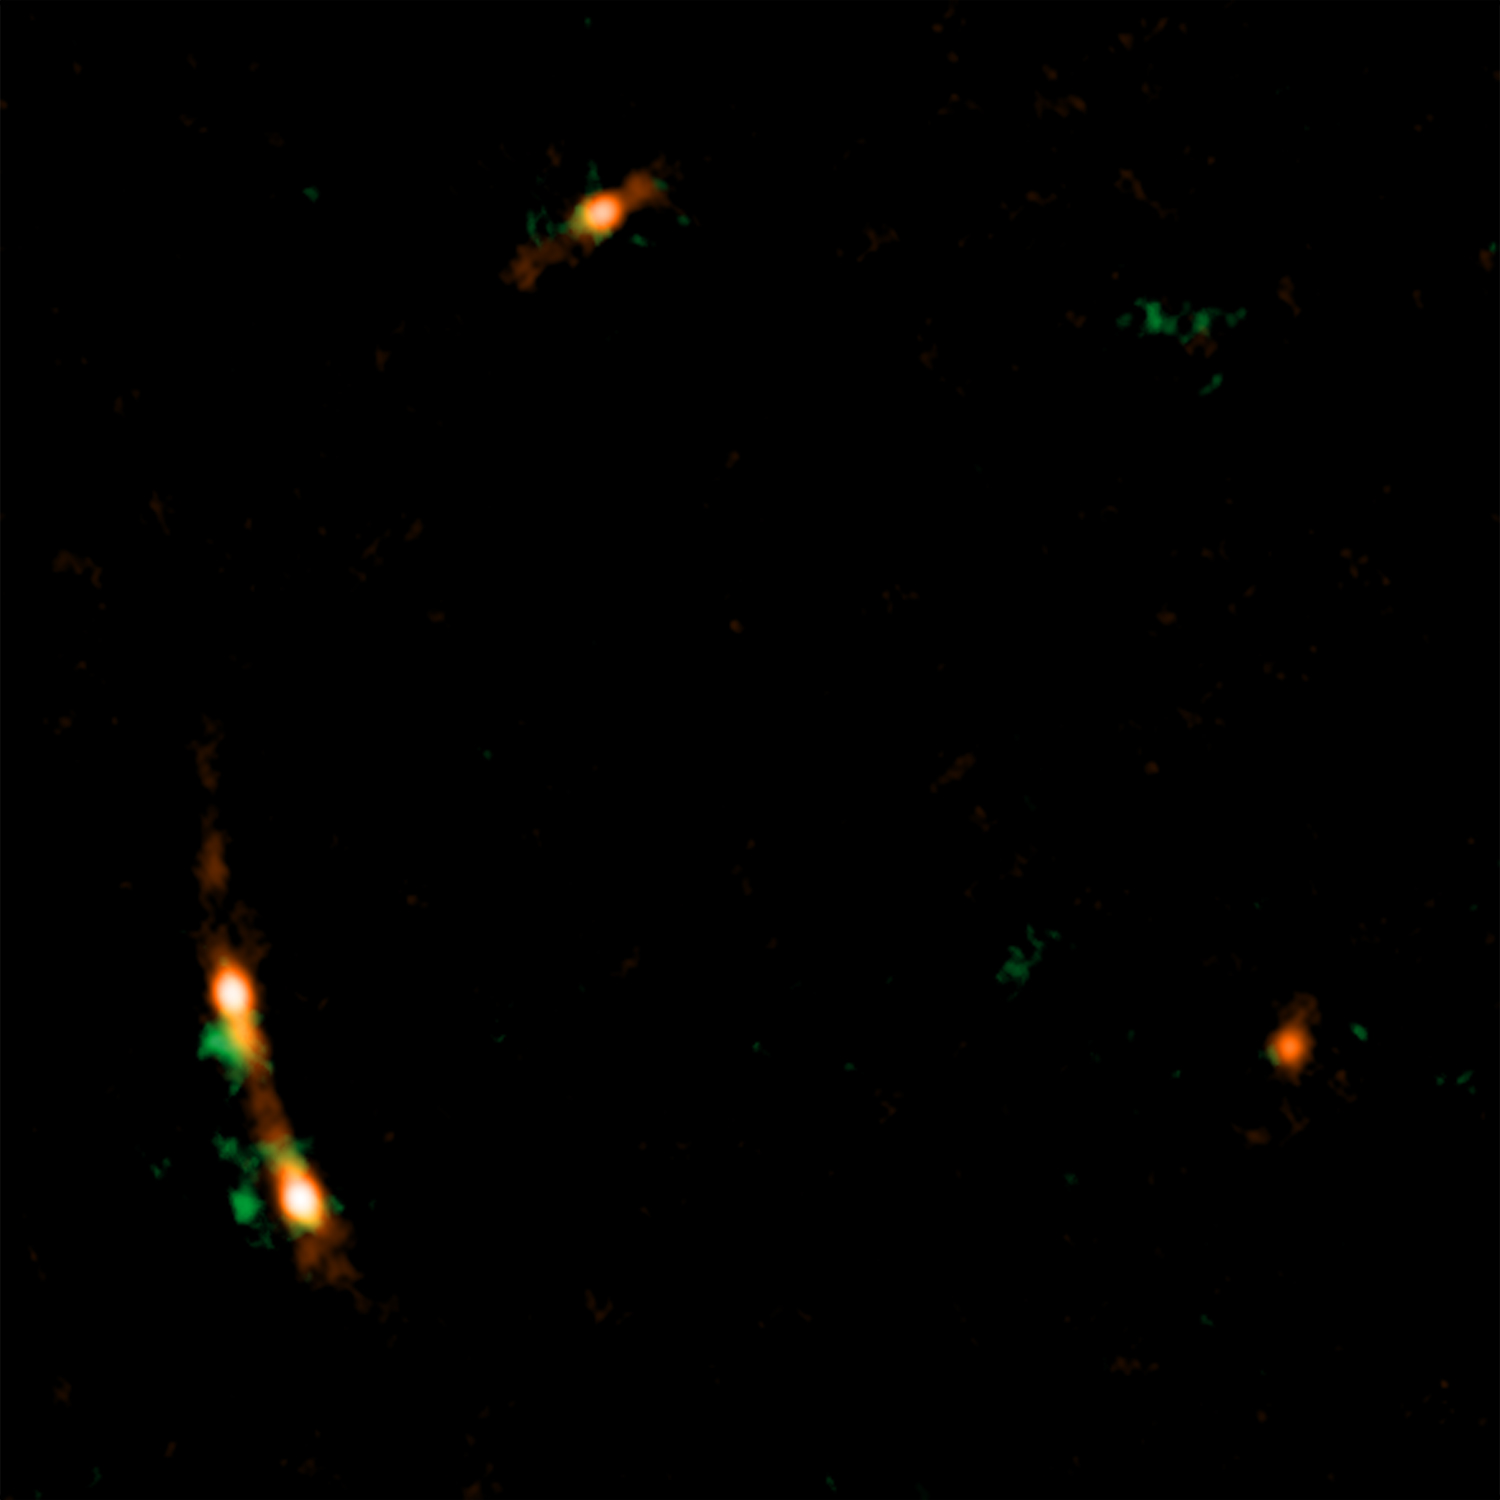 ALMA image of MG J0414+0534 (emissions from dust and ionized gas shown in red and emissions from carbon monoxide gas shown in green). Credit: ALMA (ESO/NAOJ/NRAO), K. T. Inoue at al.